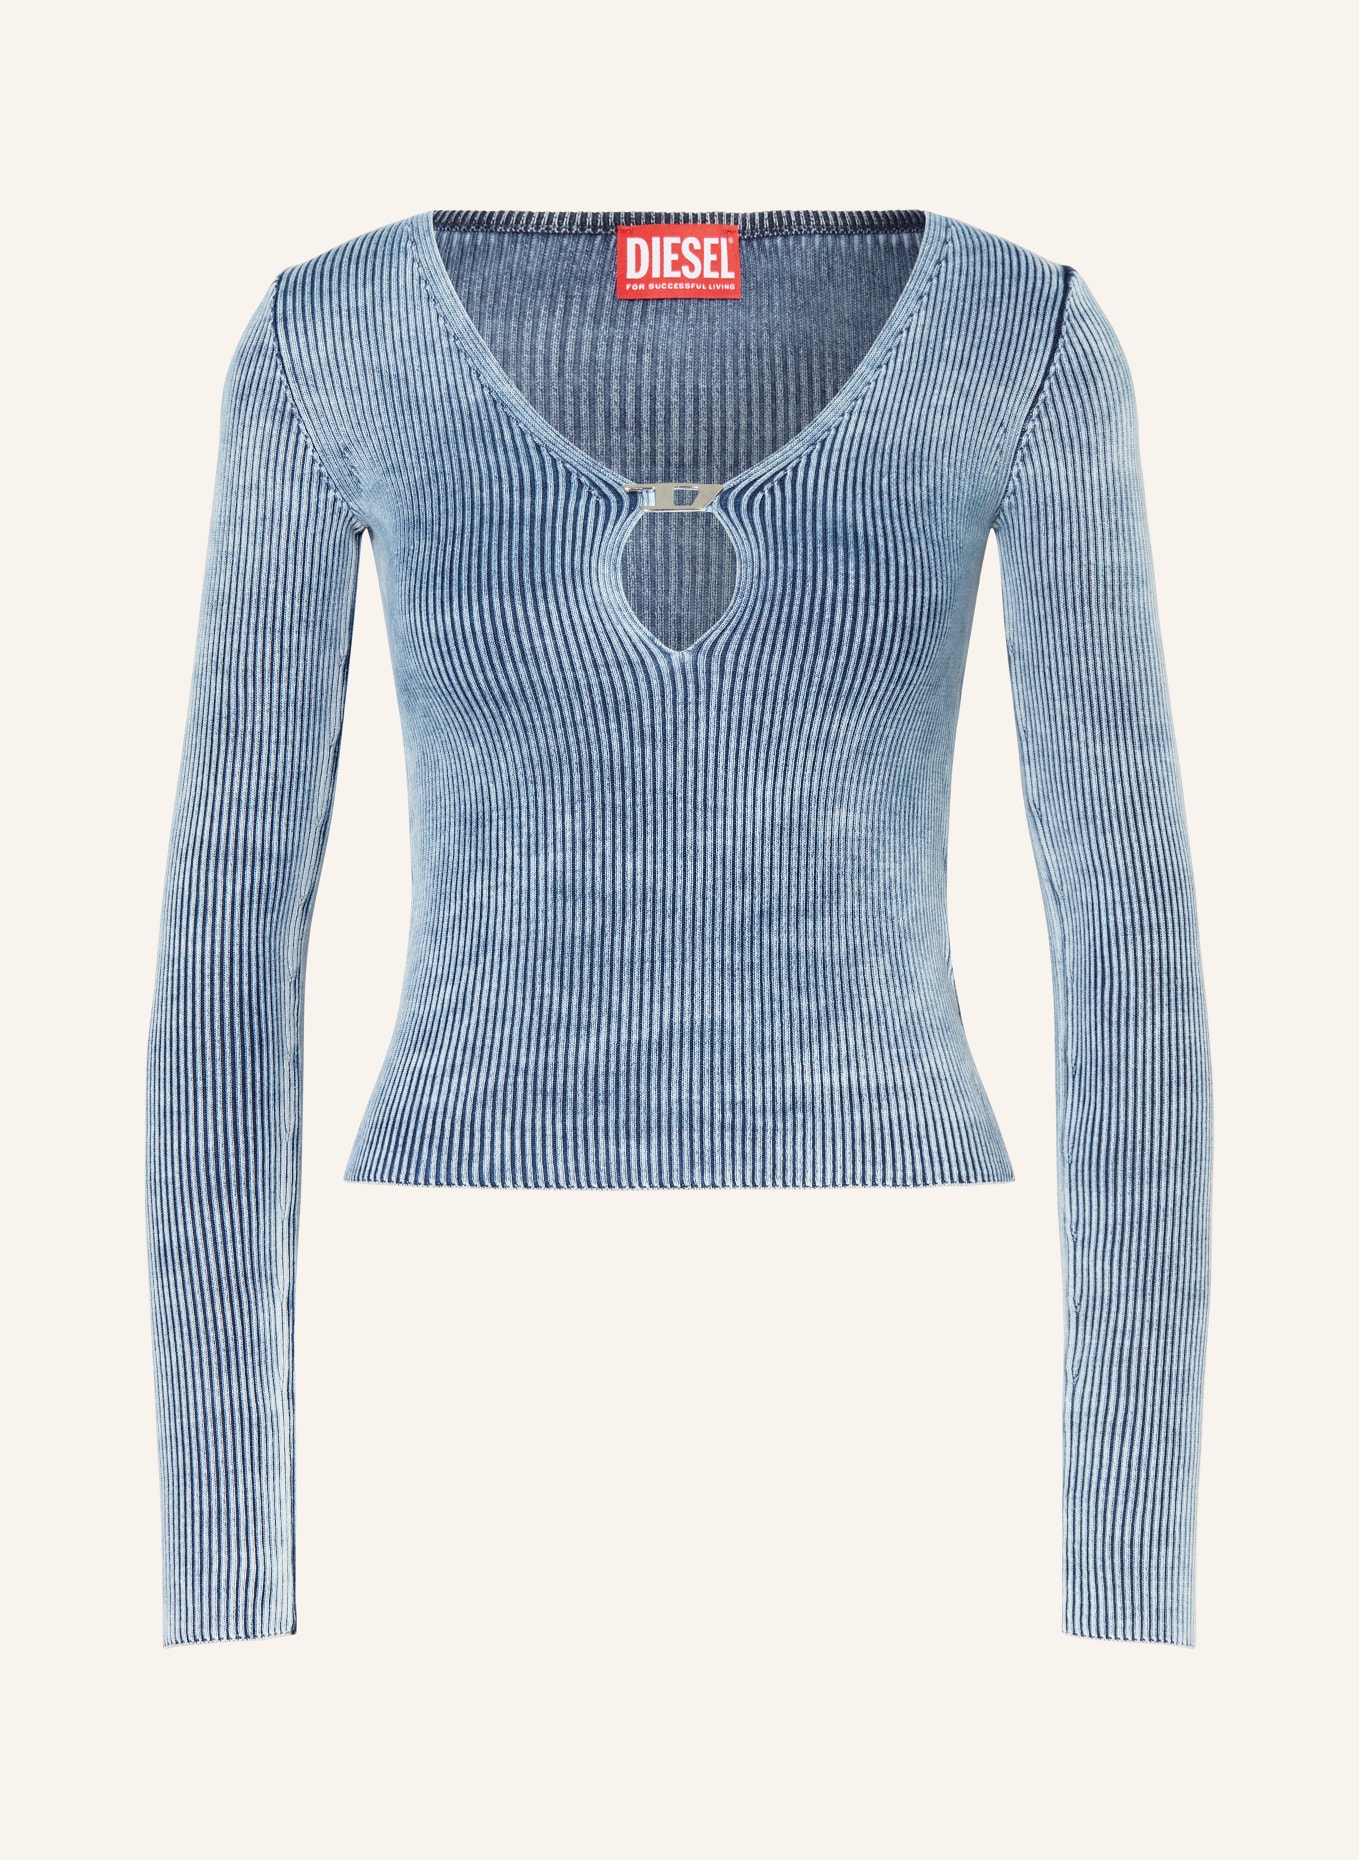 DIESEL Sweater M-TERI with cut-out, Color: DARK BLUE/ LIGHT BLUE (Image 1)